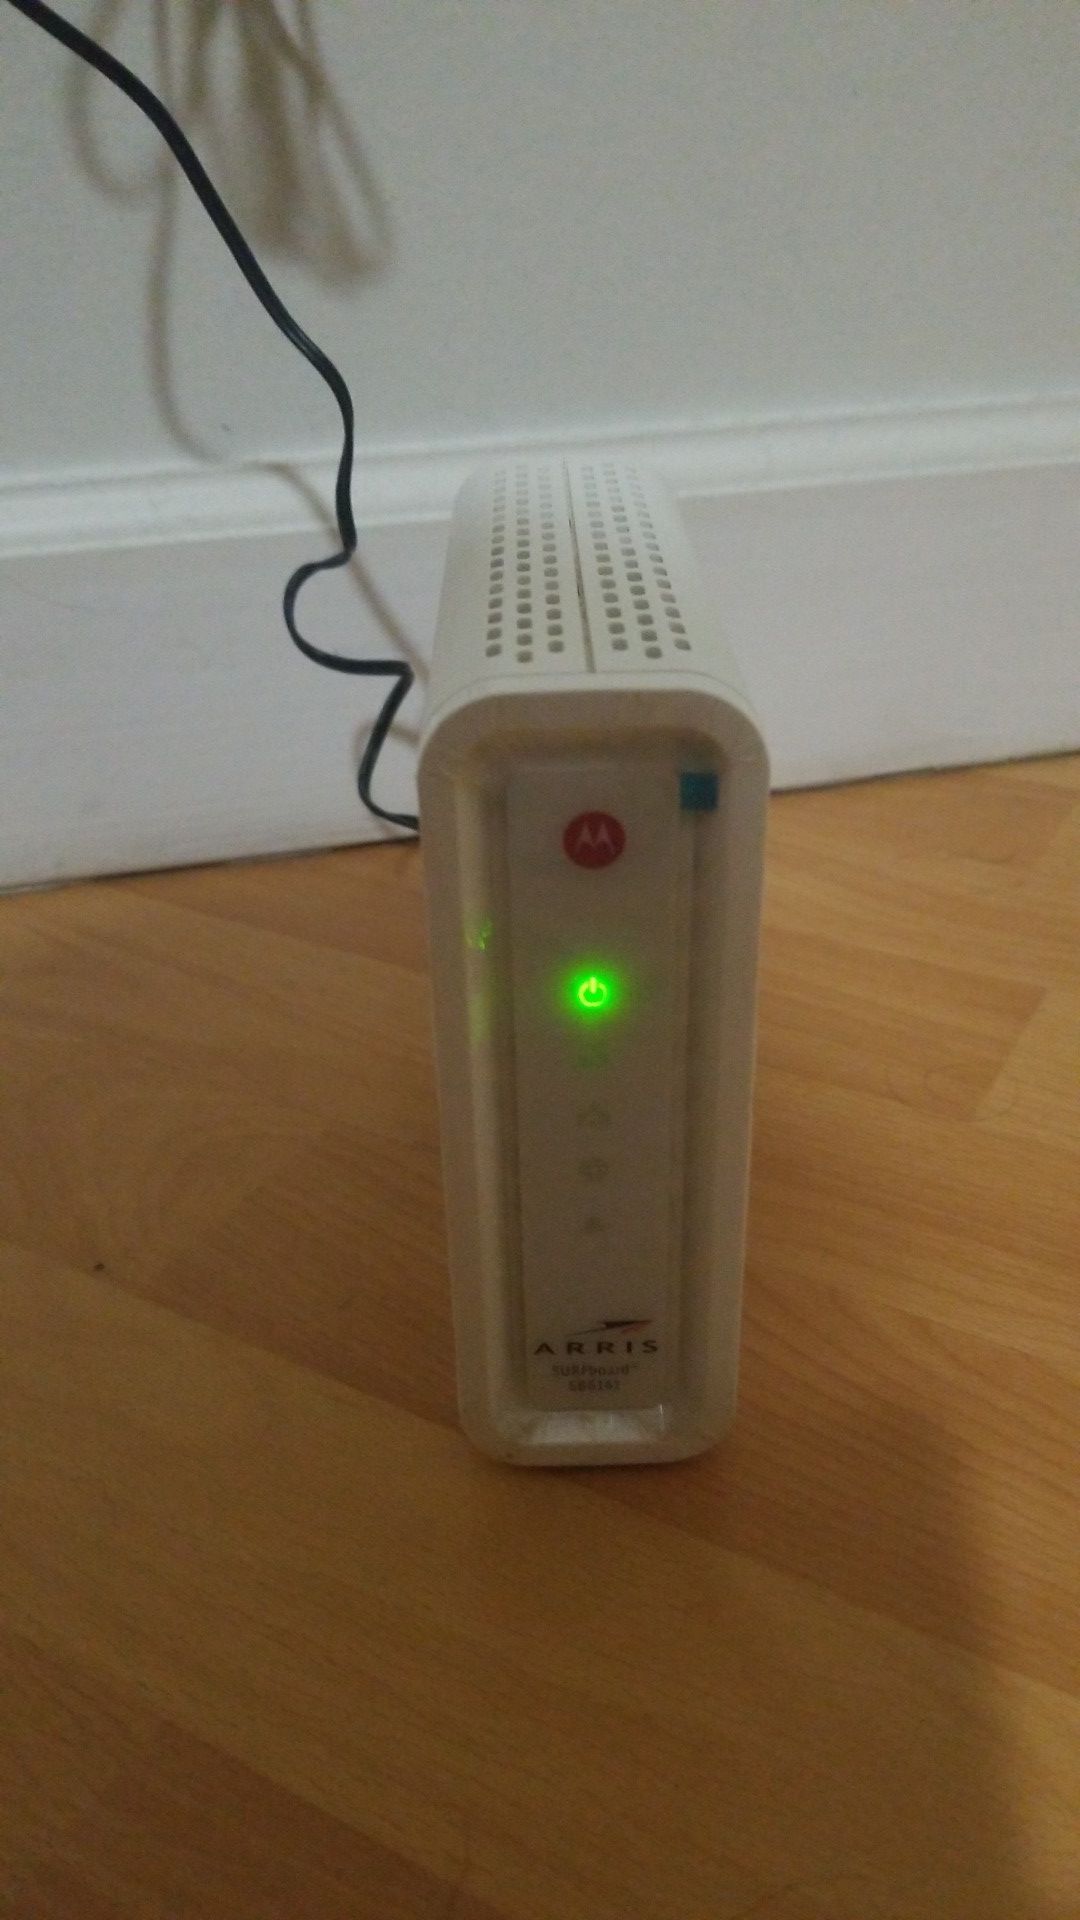 Motorola SURFboard SB6141 DOCSIS 3.0 Cable Modem (White) - Works with Comcast!